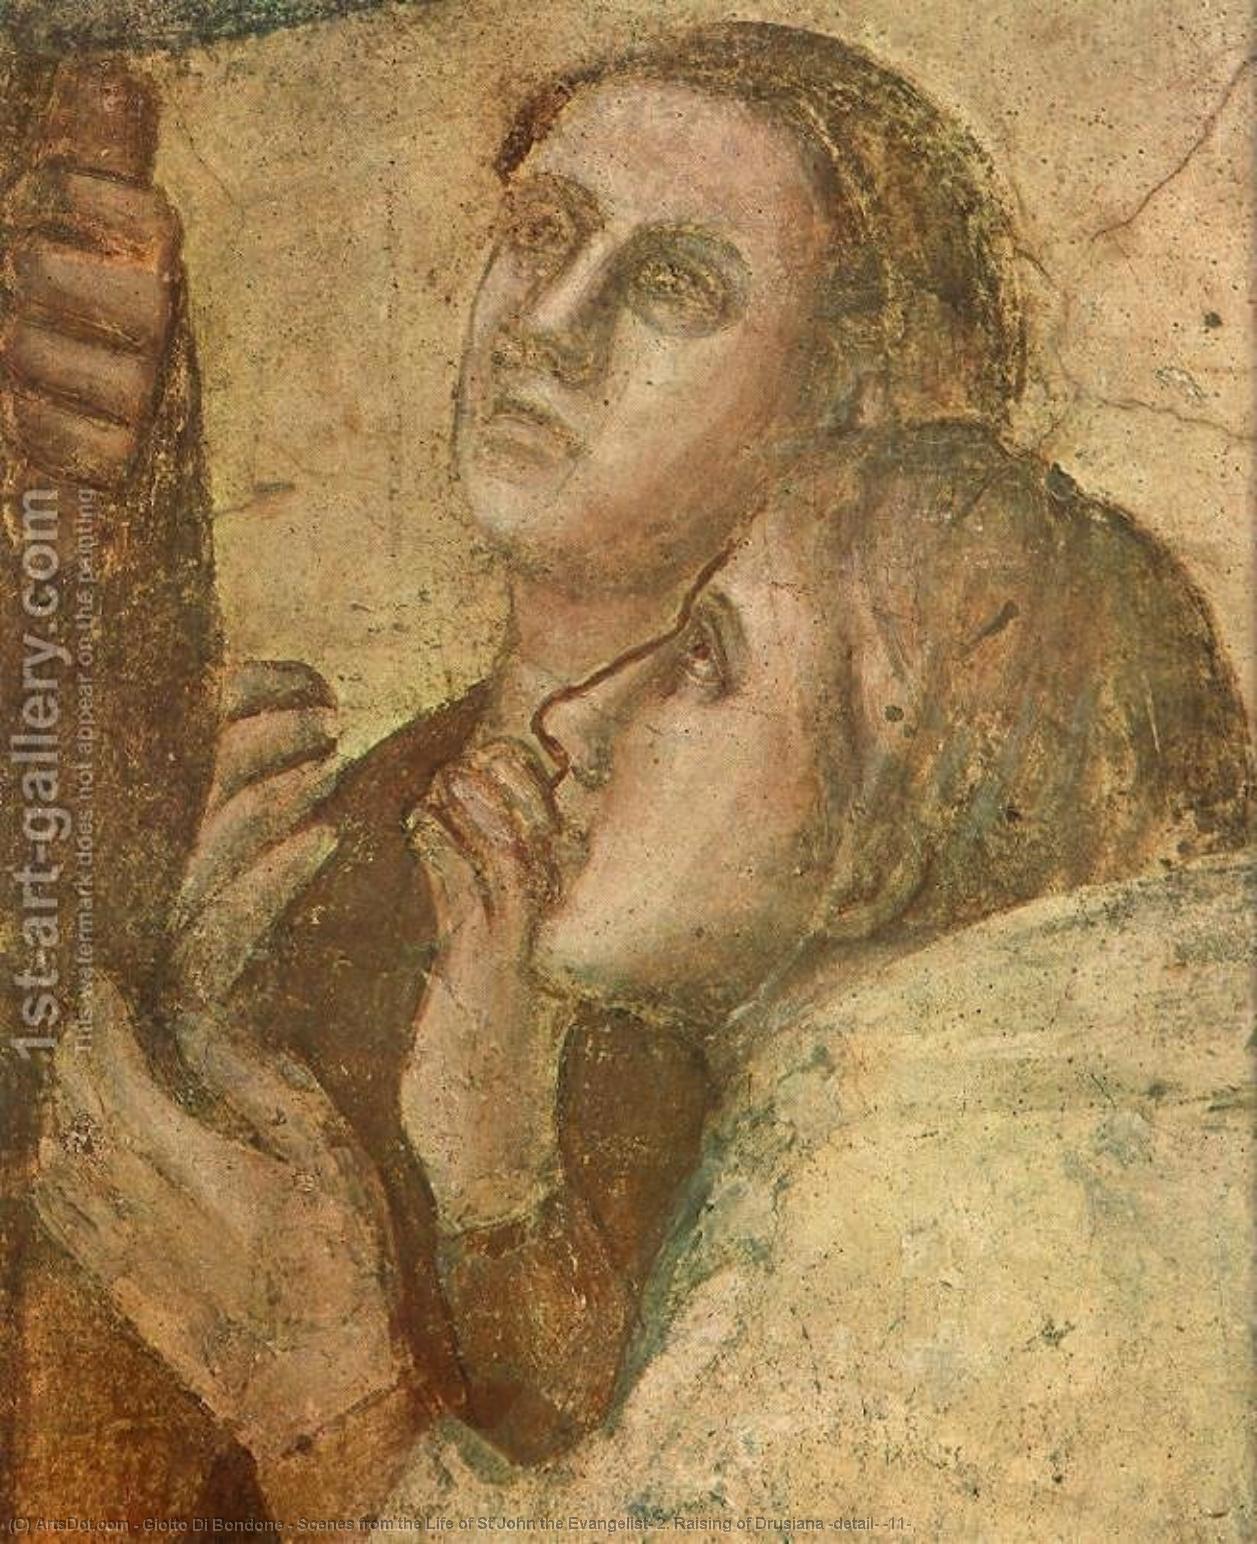 WikiOO.org - Encyclopedia of Fine Arts - Lukisan, Artwork Giotto Di Bondone - Scenes from the Life of St John the Evangelist: 2. Raising of Drusiana (detail) (11)